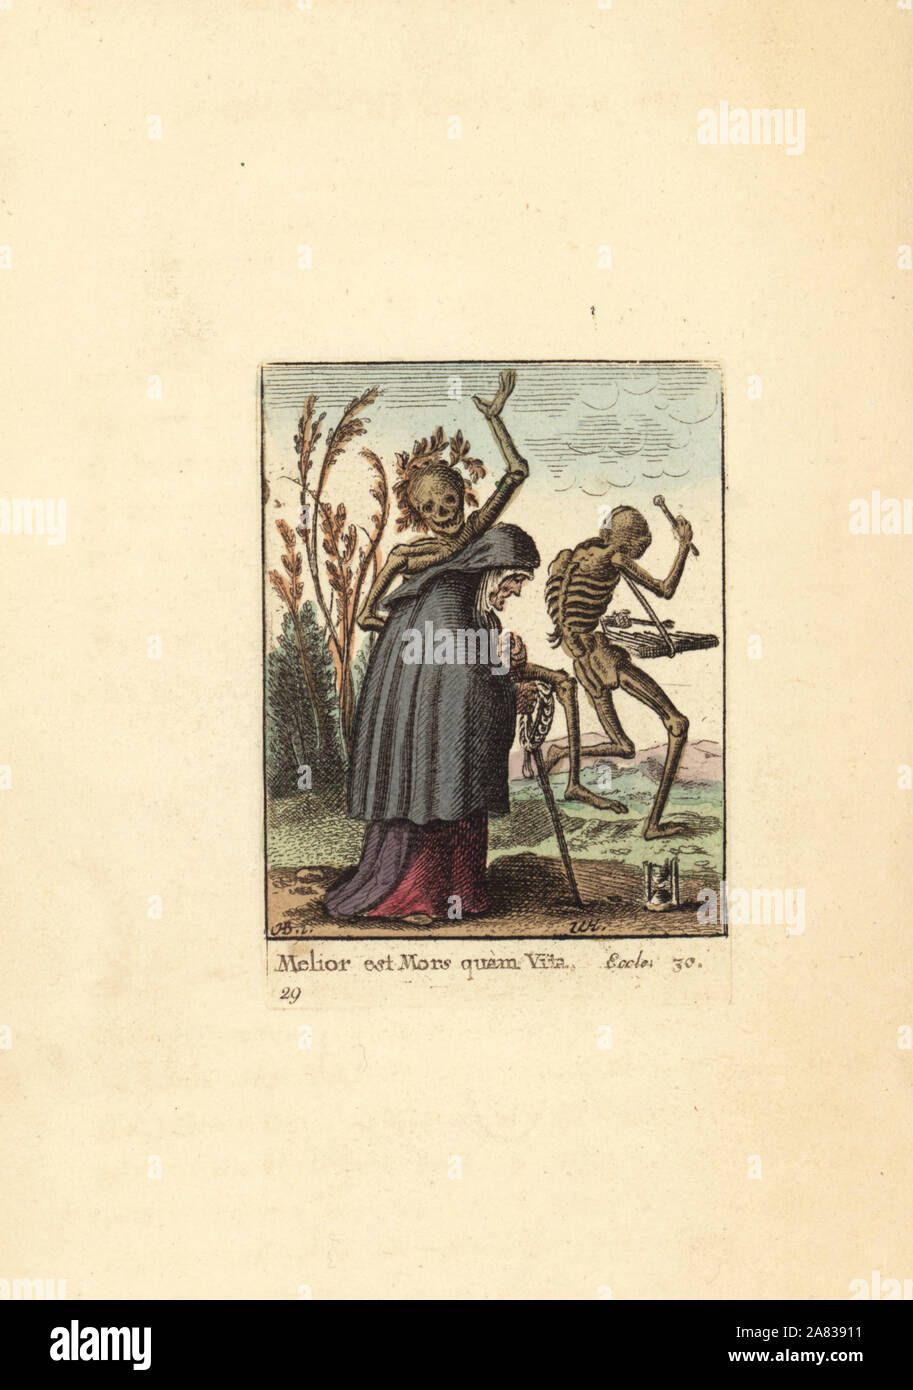 Two Skeletons of Death lead an Old Woman to her fate as she prays on her rosary. One has a wreath on its skull and beats her, and the other plays a dulcimer. Handcoloured copperplate engraving by Wenceslaus Hollar from The Dance of Death by Hans Holbein, Coxhead, London, 1816. Stock Photo